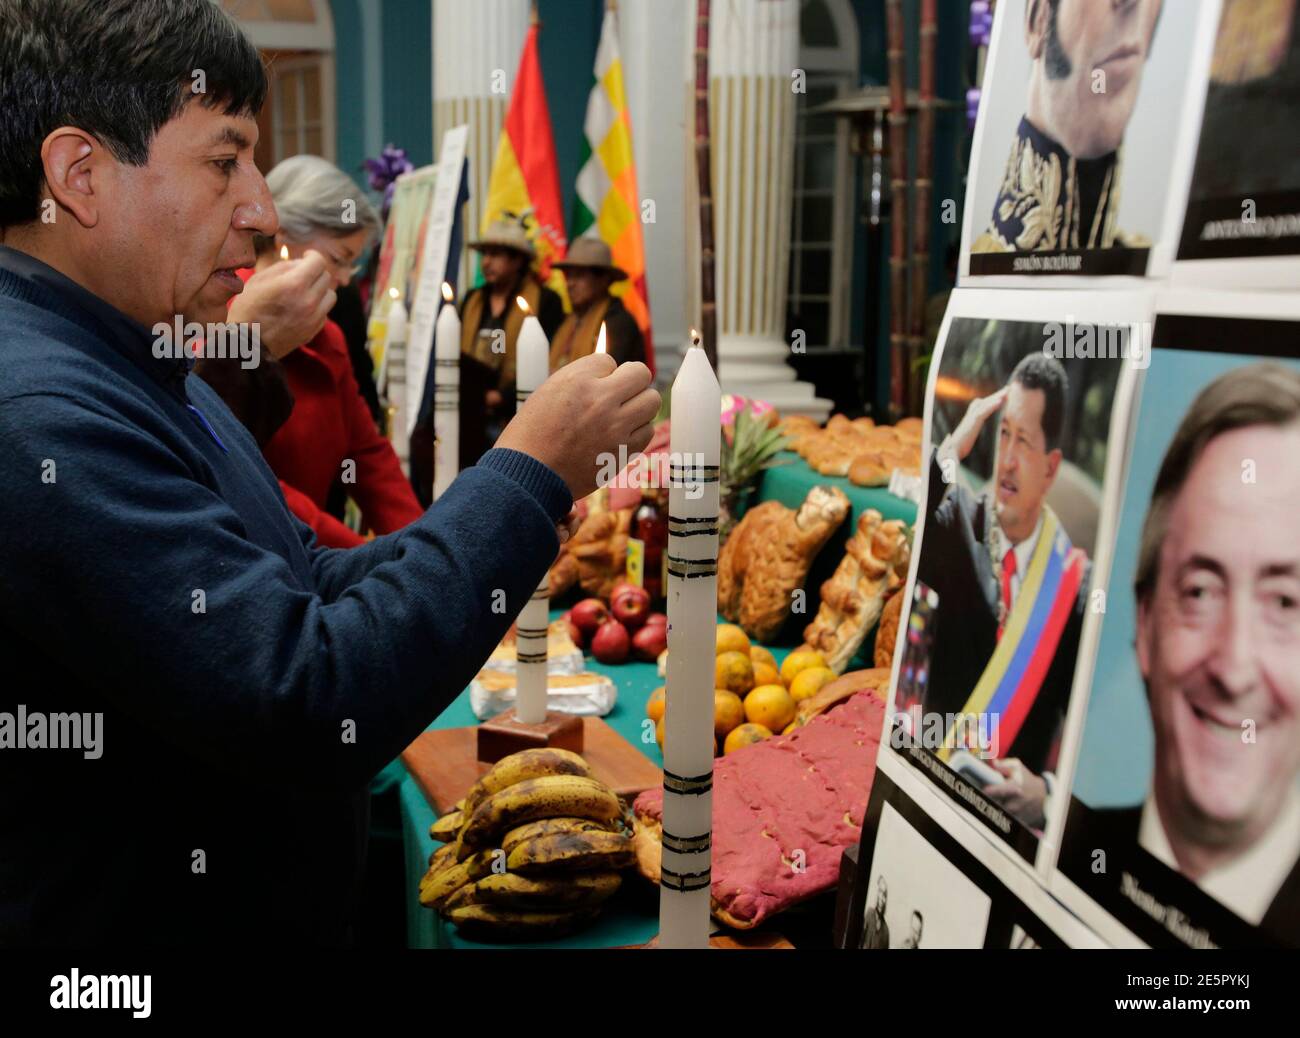 Bolivian Foreign Minister David Choquehuanca lights a candle during an All Saints' Day celebration in front of images depicting Argentine former president Nestor Kirchner and Venezuela's Hugo Chavez in La Paz, November 1, 2013. Traditionally, indigenous Bolivians celebrate All Saints Day by paying homage to their dead ones with a feast of home-baked, doll-shaped breads, fresh fruit and coca leaves and flowers. The syncretism practiced by the Aymaras, a blend of Catholicism and indigenous beliefs, calls for the offerings to be neatly placed on top of graves, and then to give them away to beggar Foto de stock